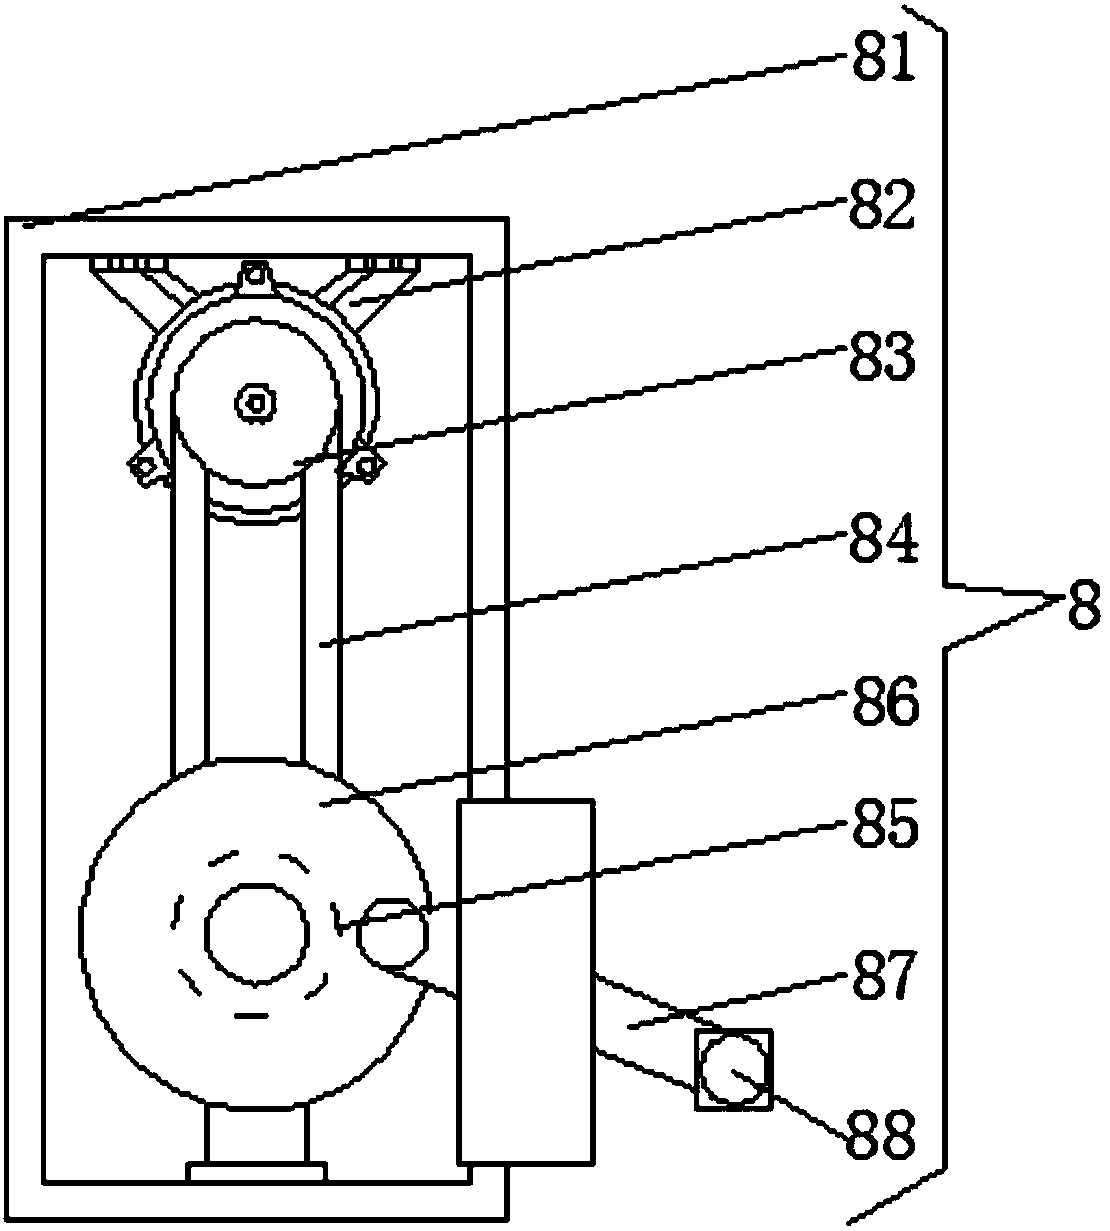 Environment-friendly horizontal feed crushing and screening device for livestock and poultry breeding